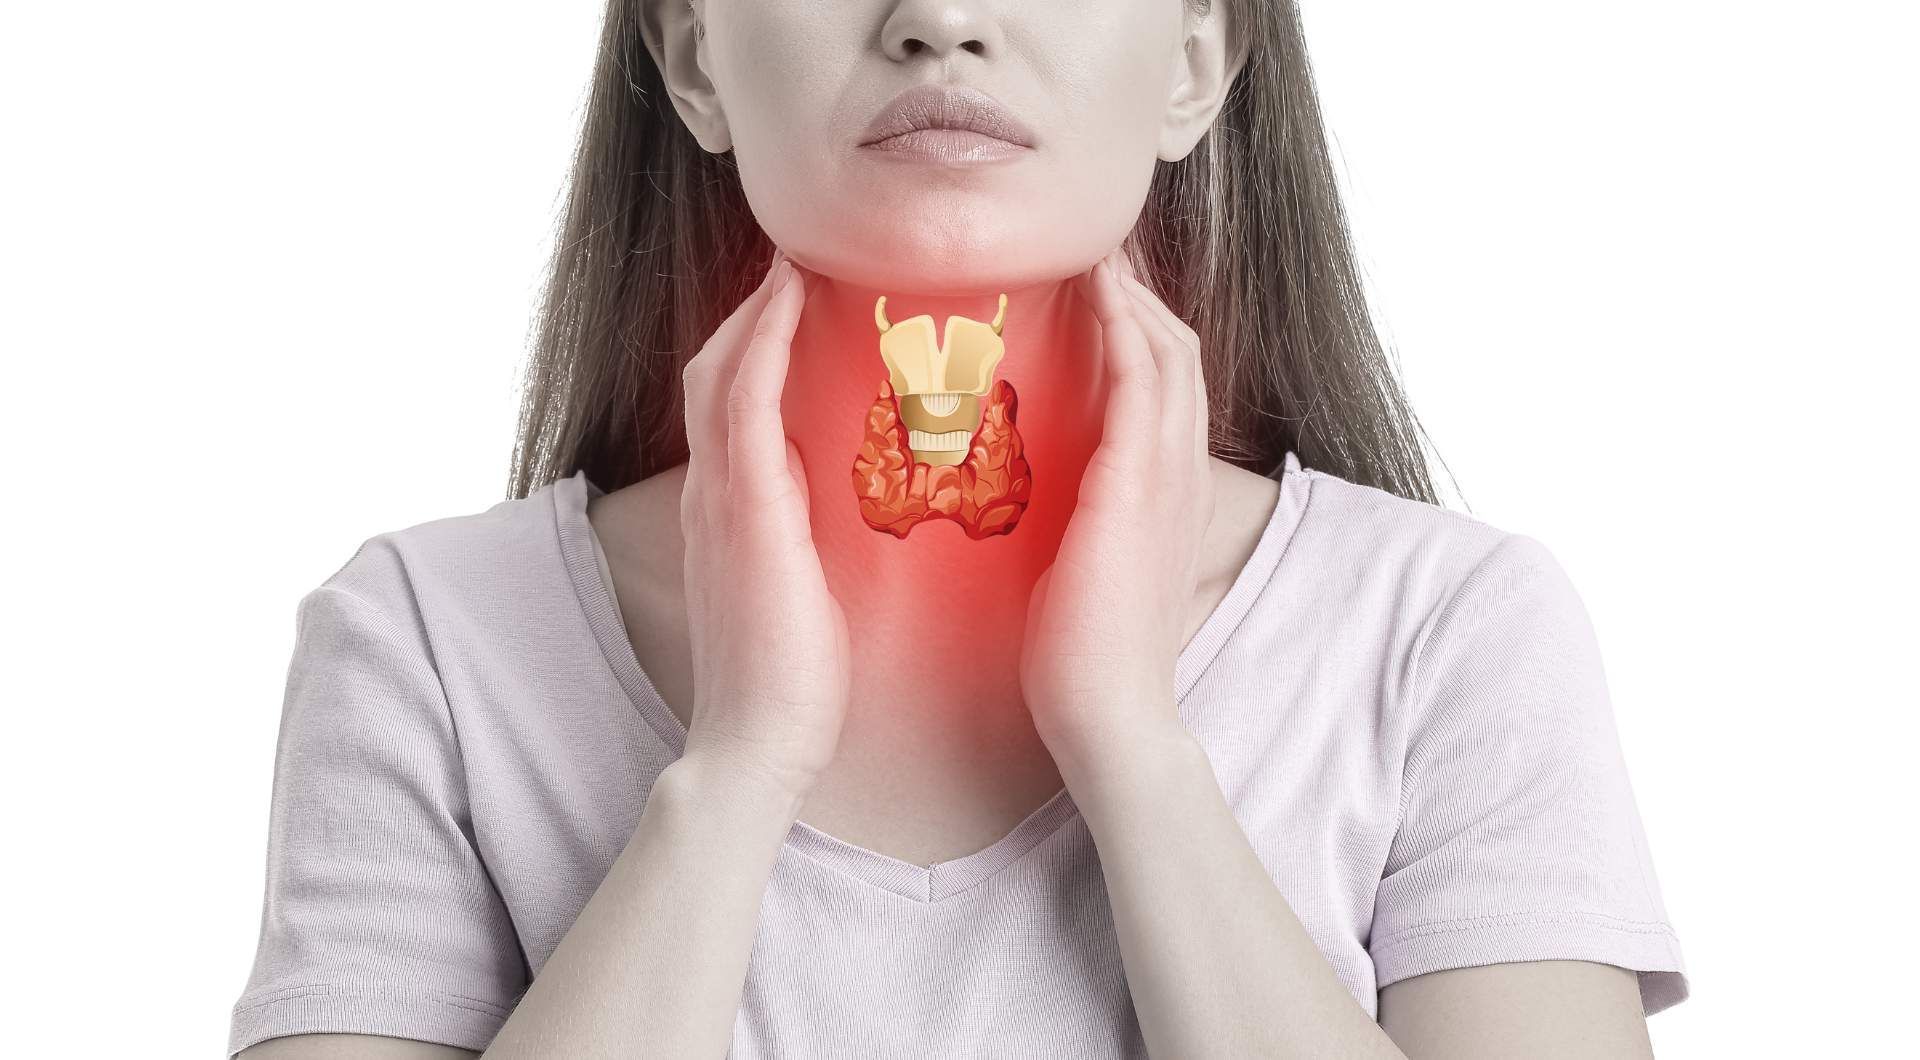 can hypothyroidism cause anxiety